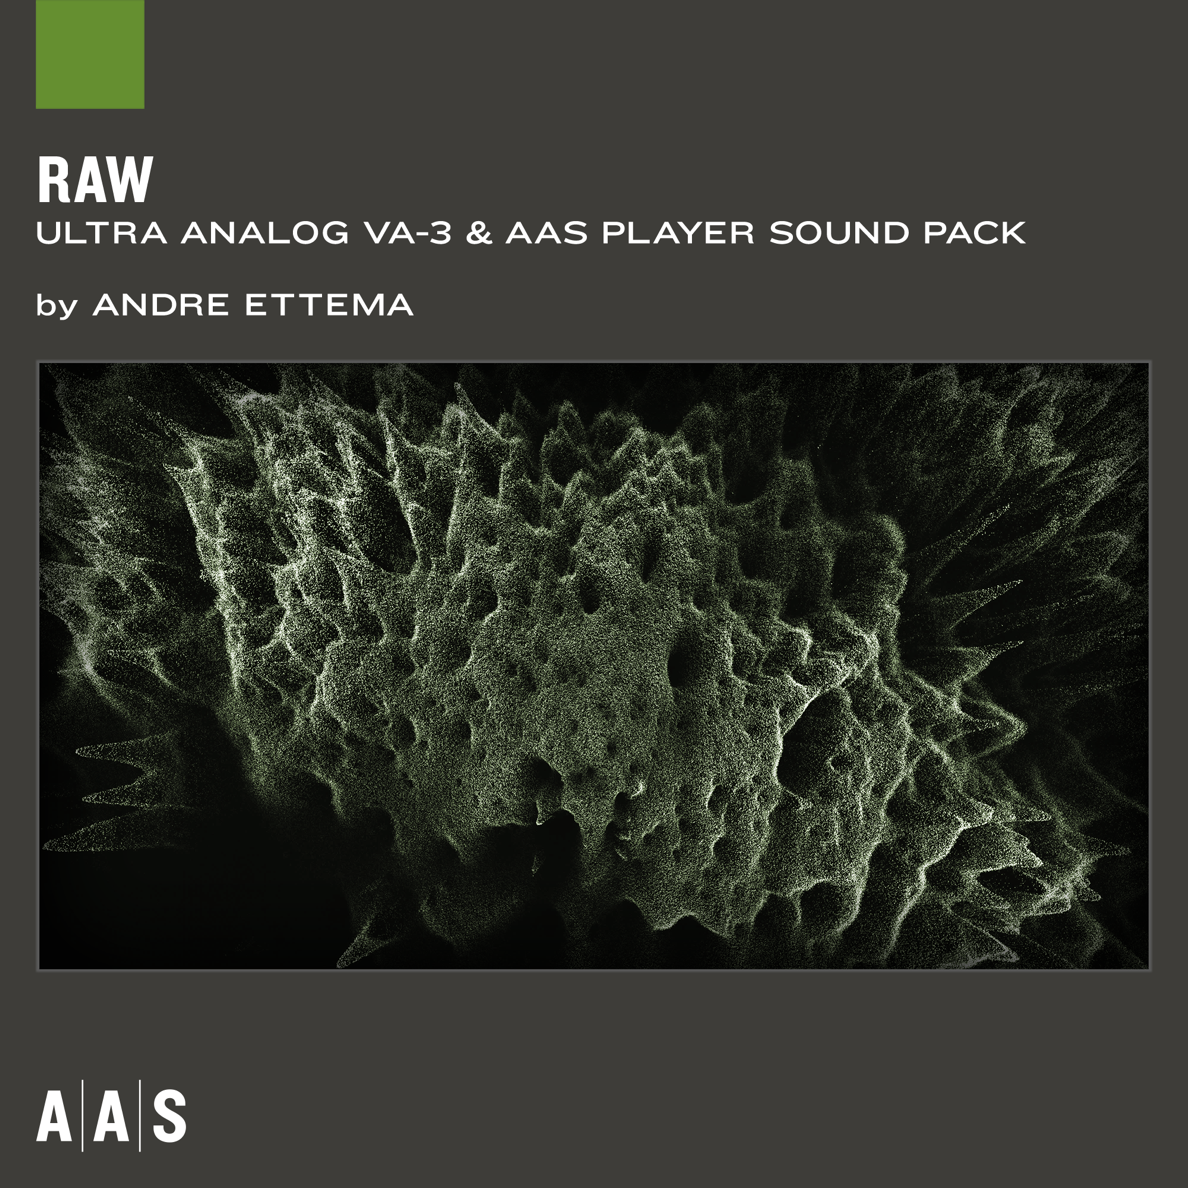 Ultra Analog and AAS Player sound pack ： Raw